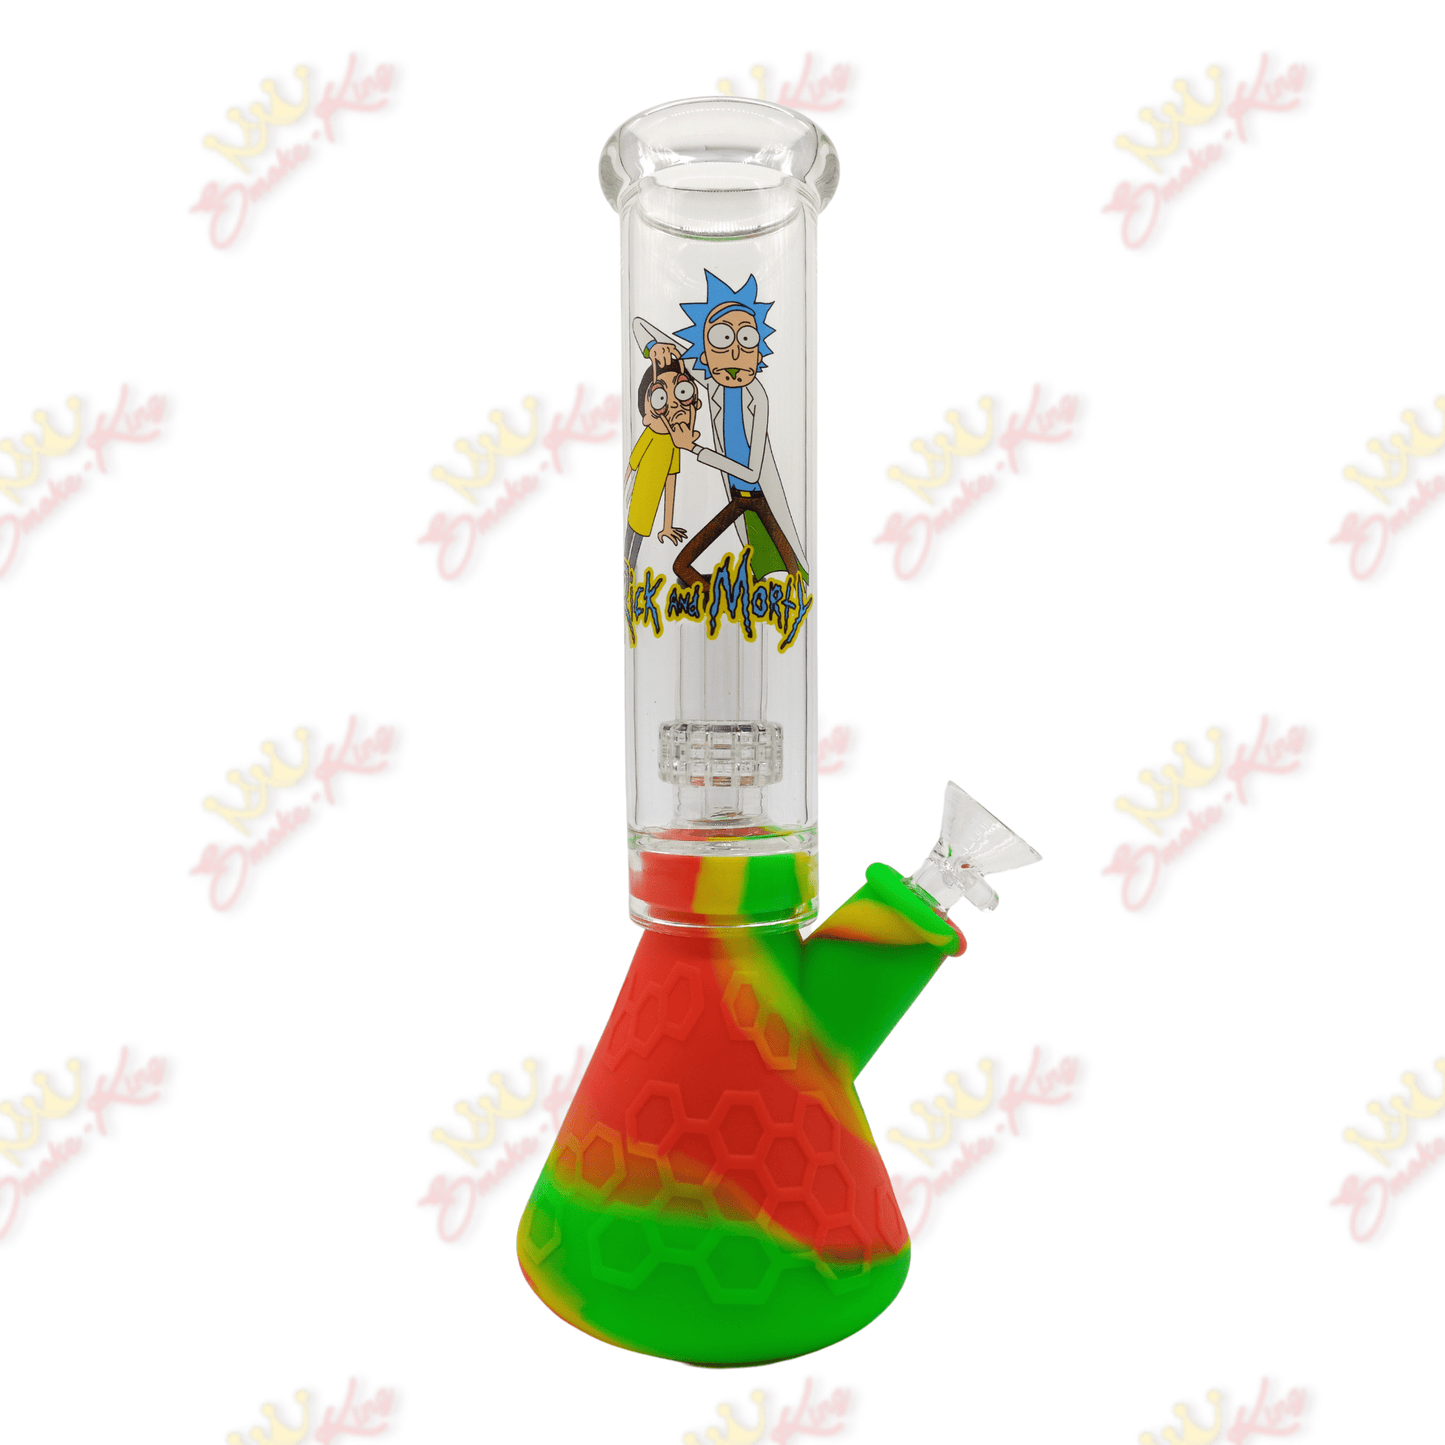 Rick and Morty Silicone Bong